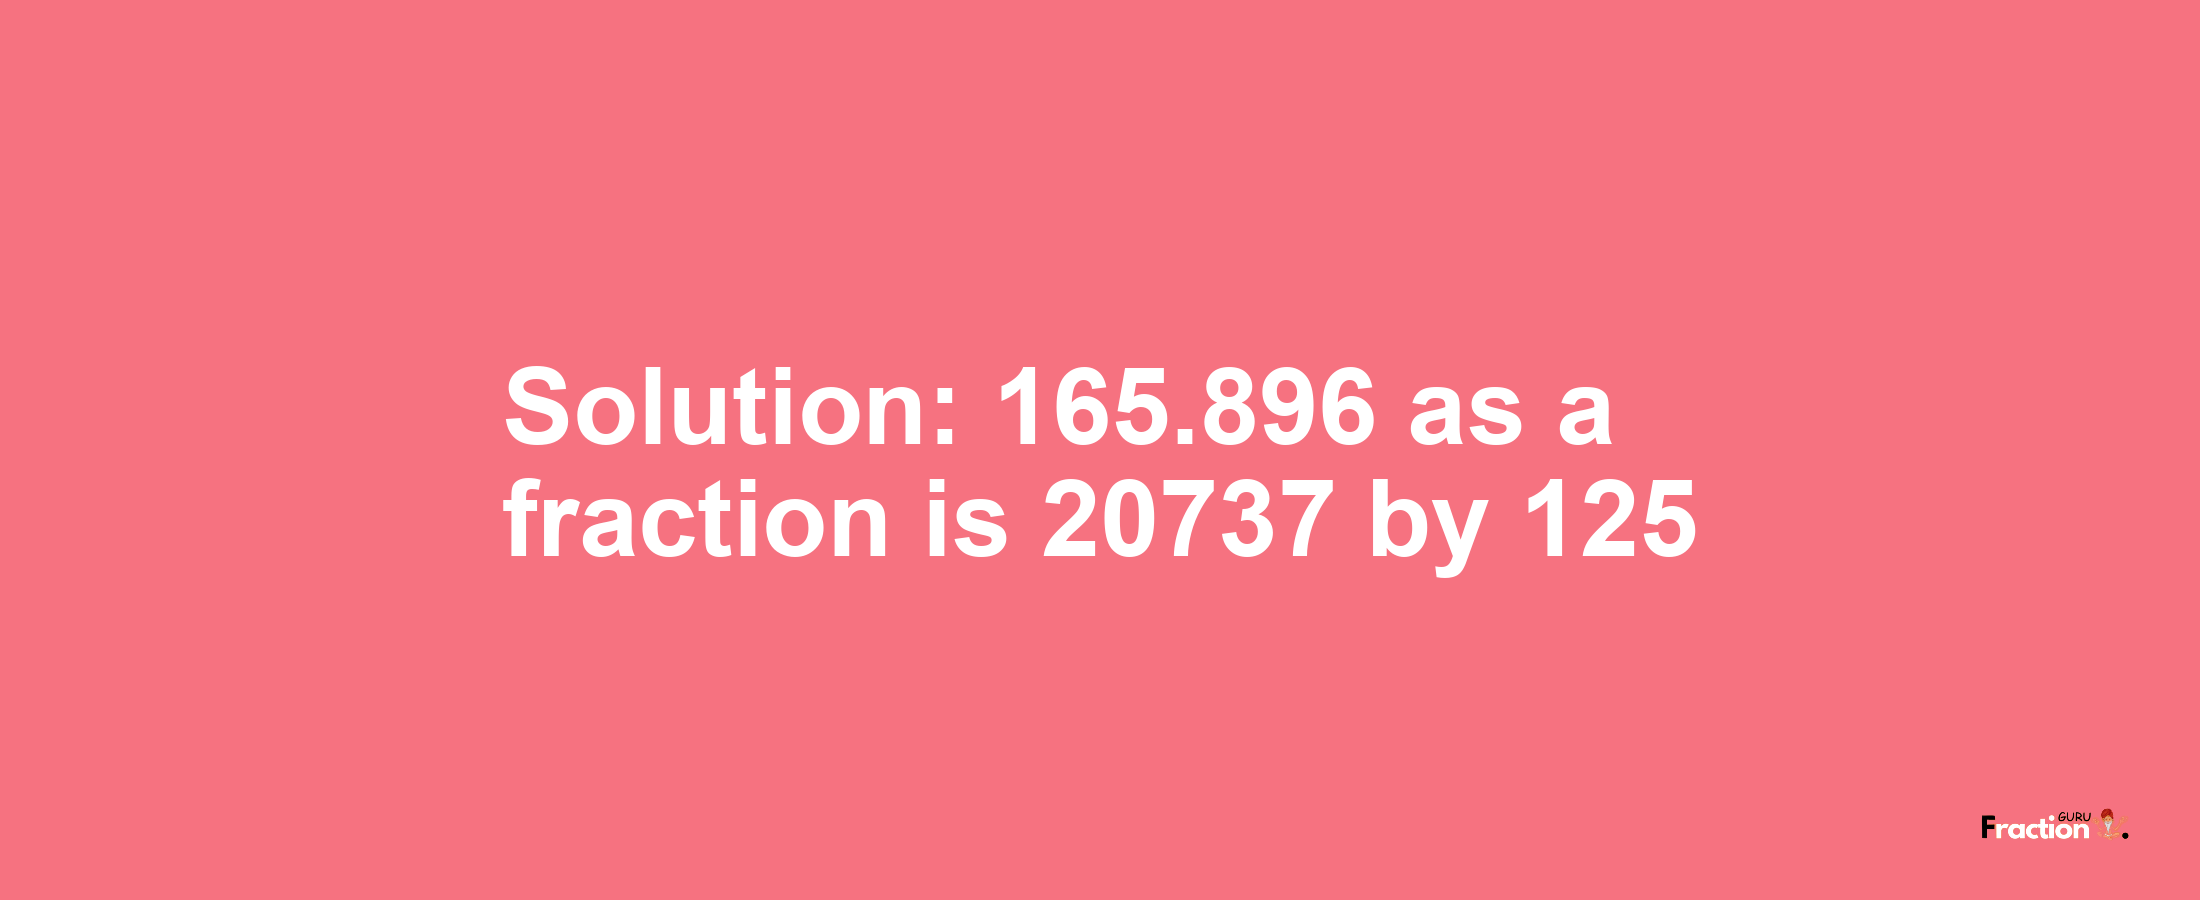 Solution:165.896 as a fraction is 20737/125